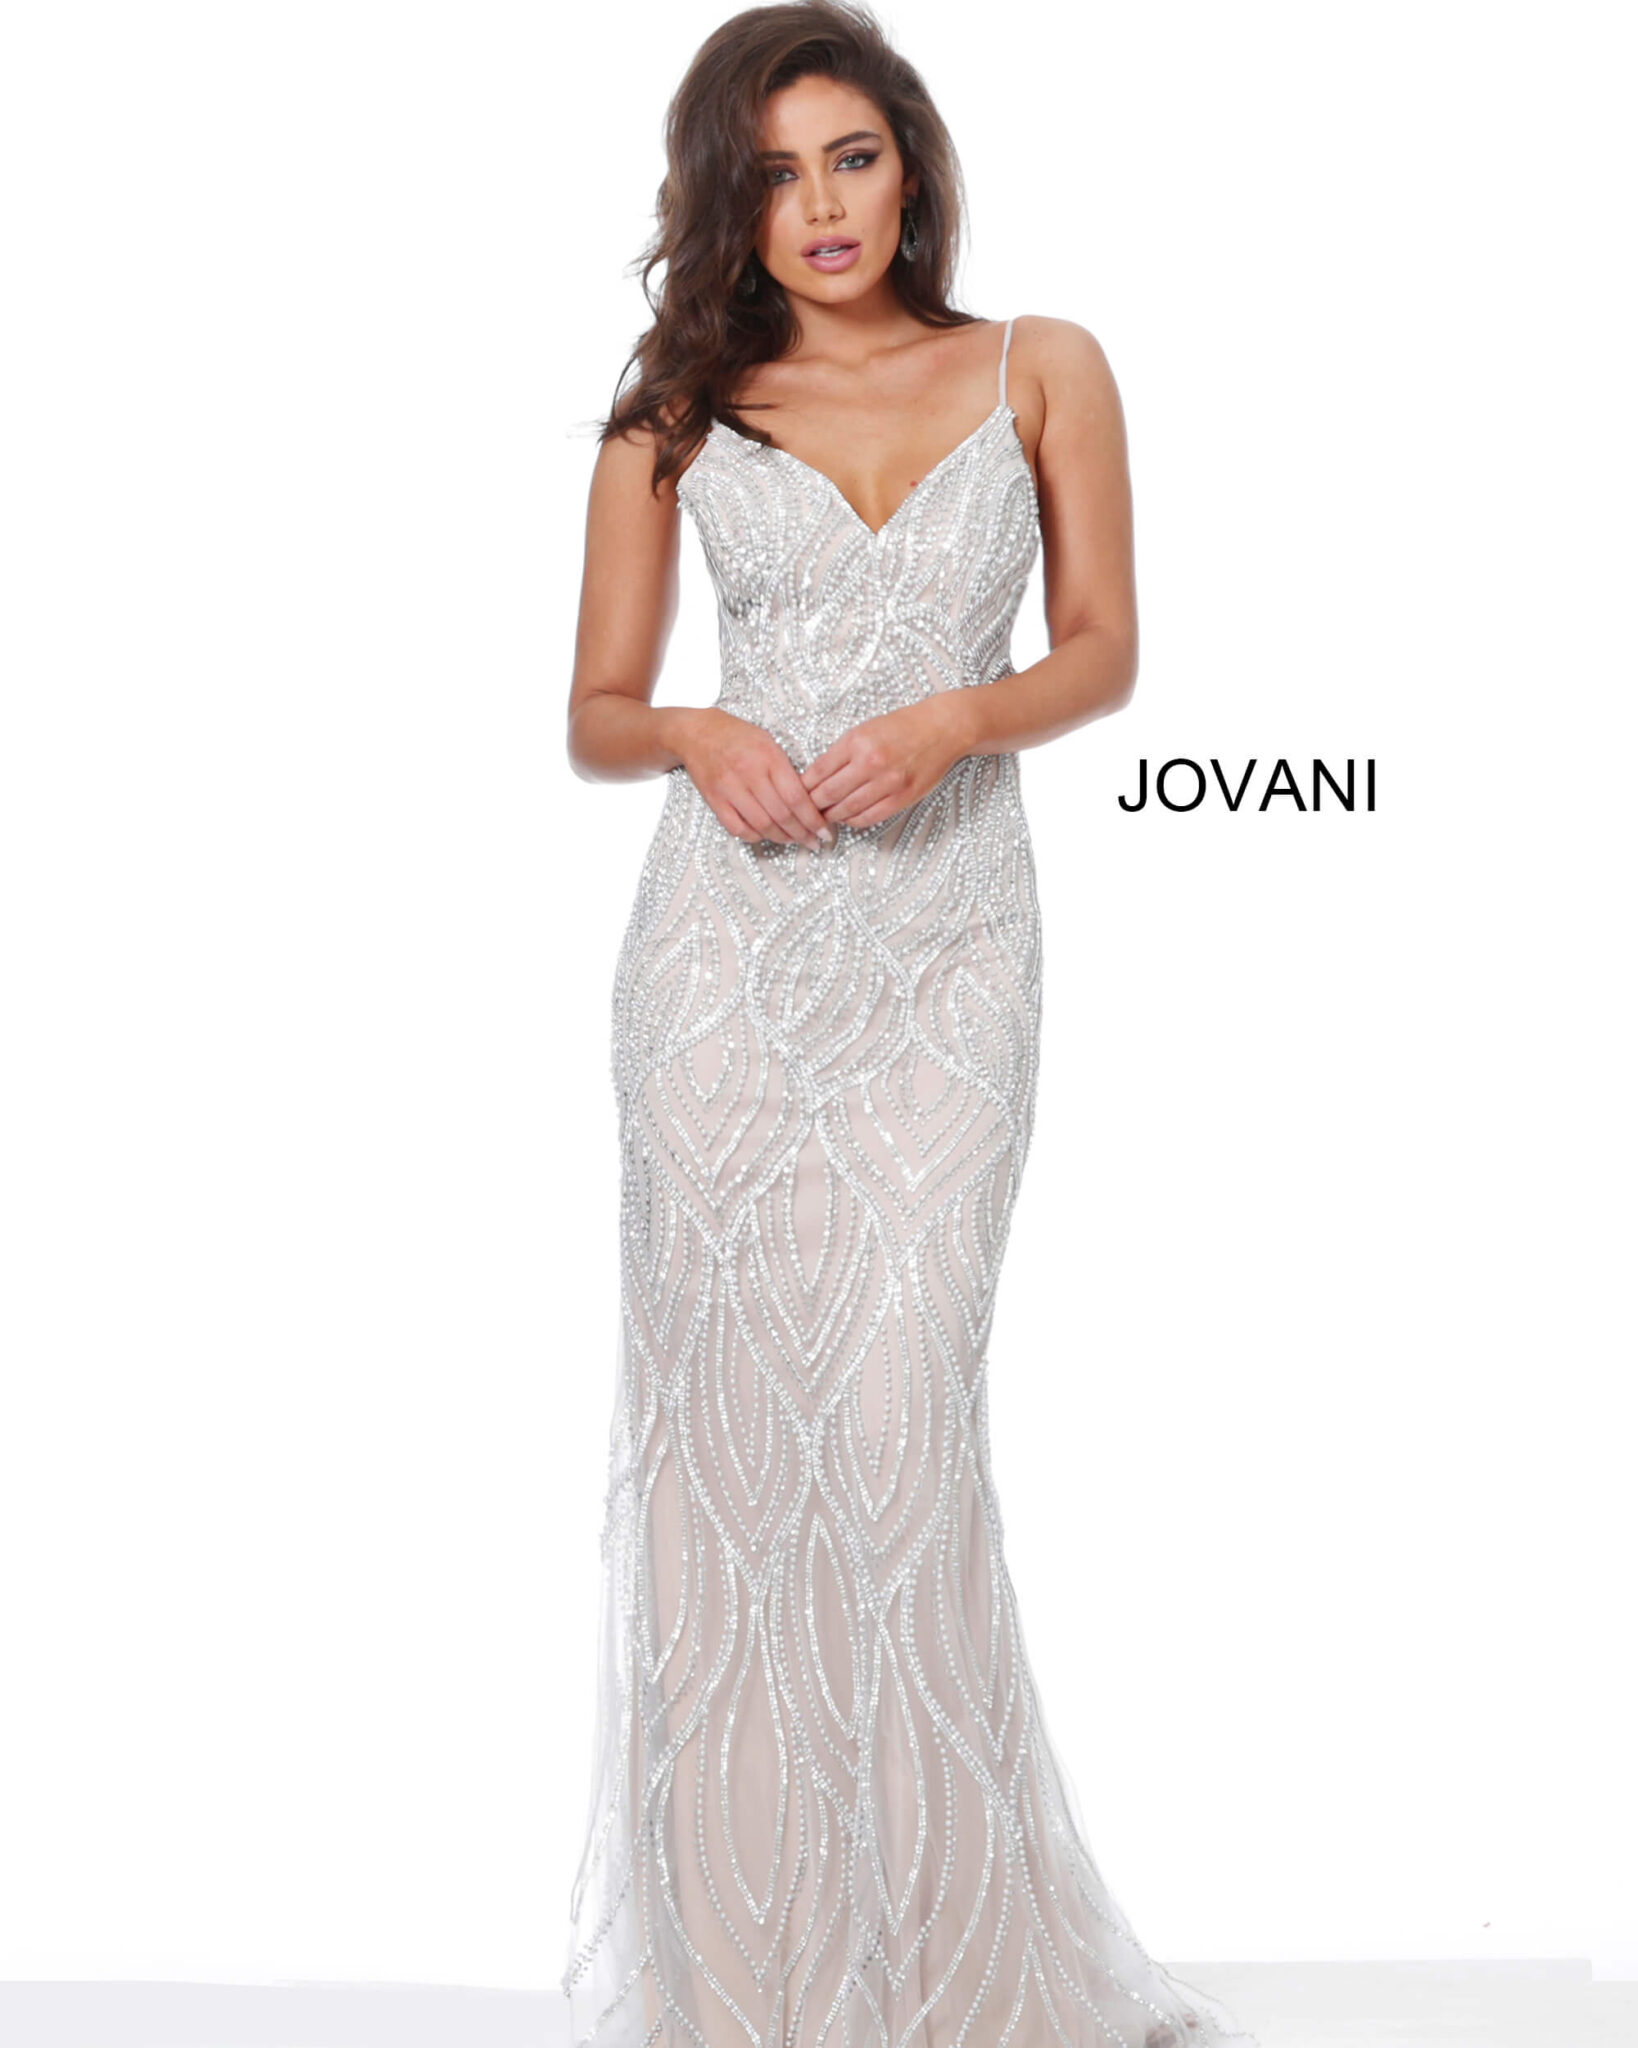 Jovani Wedding Evening Dress and Gown Collection | Bridal Reflections